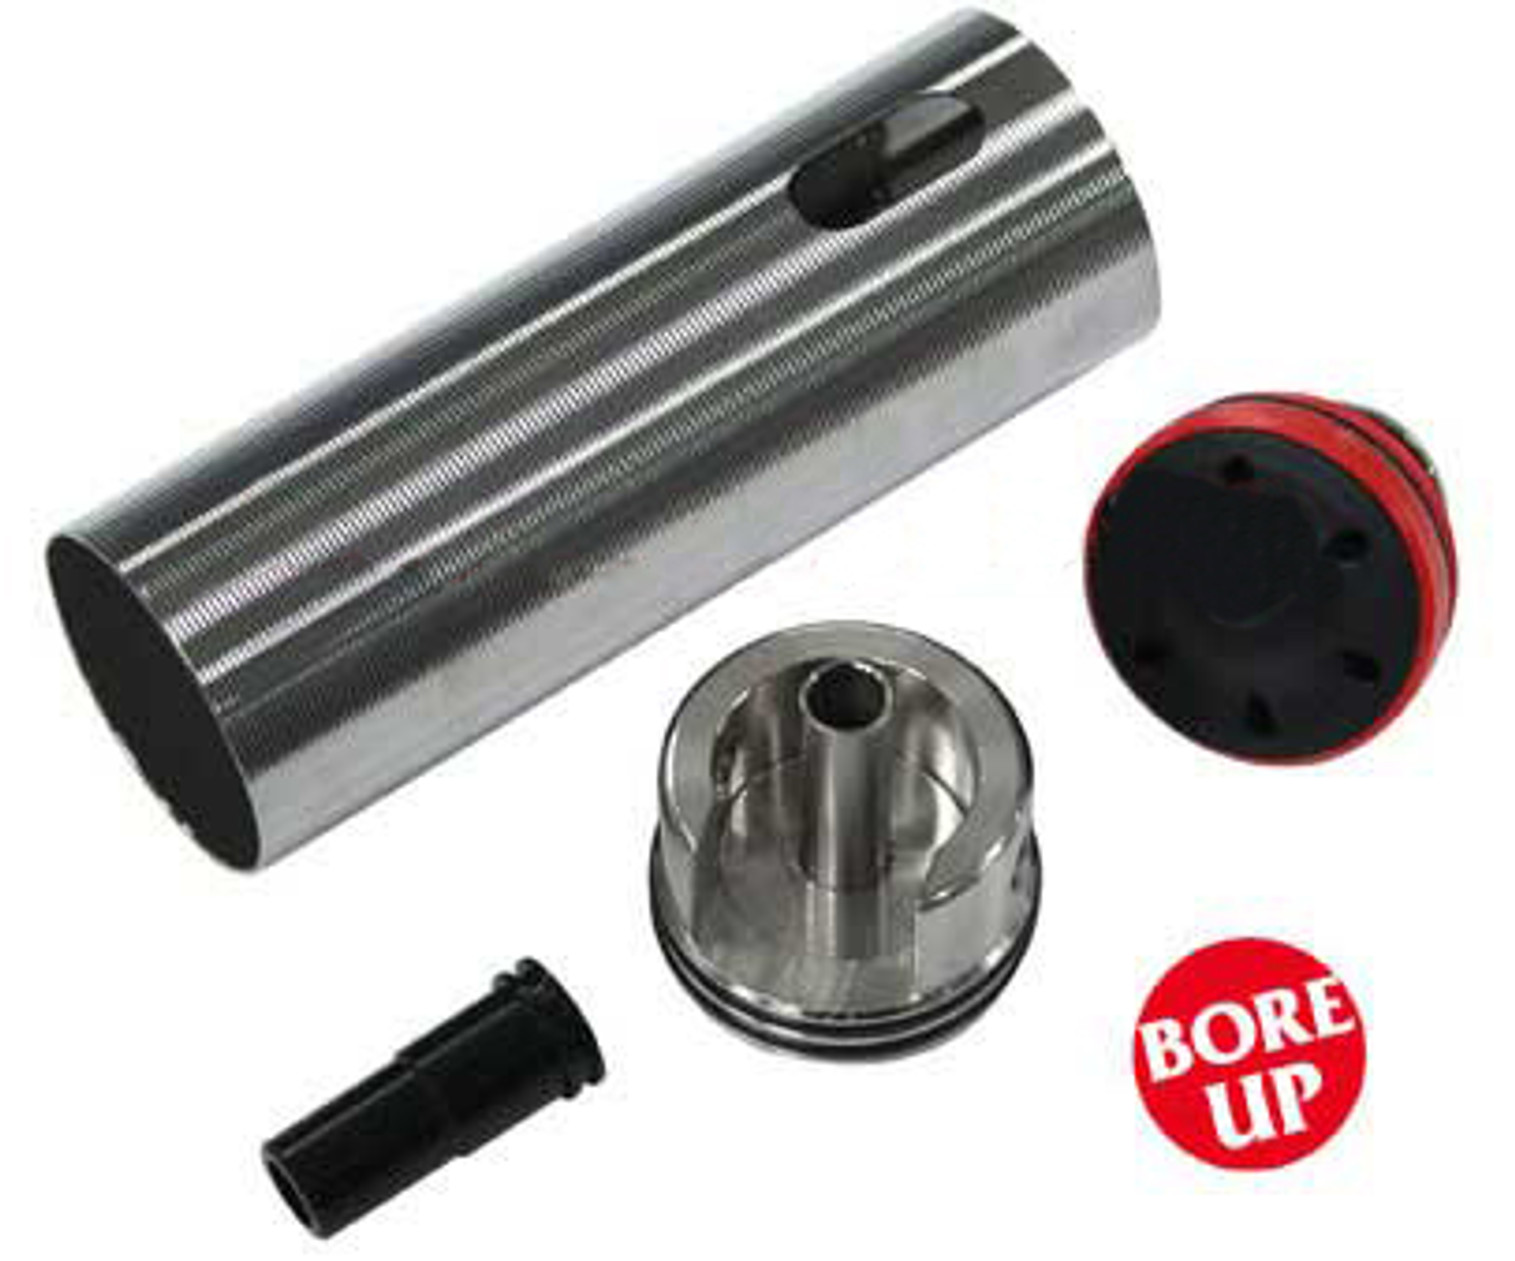 Guarder Bore-Up Cylinder Set for XM177 / M4 Stubby Series Airsoft AEG